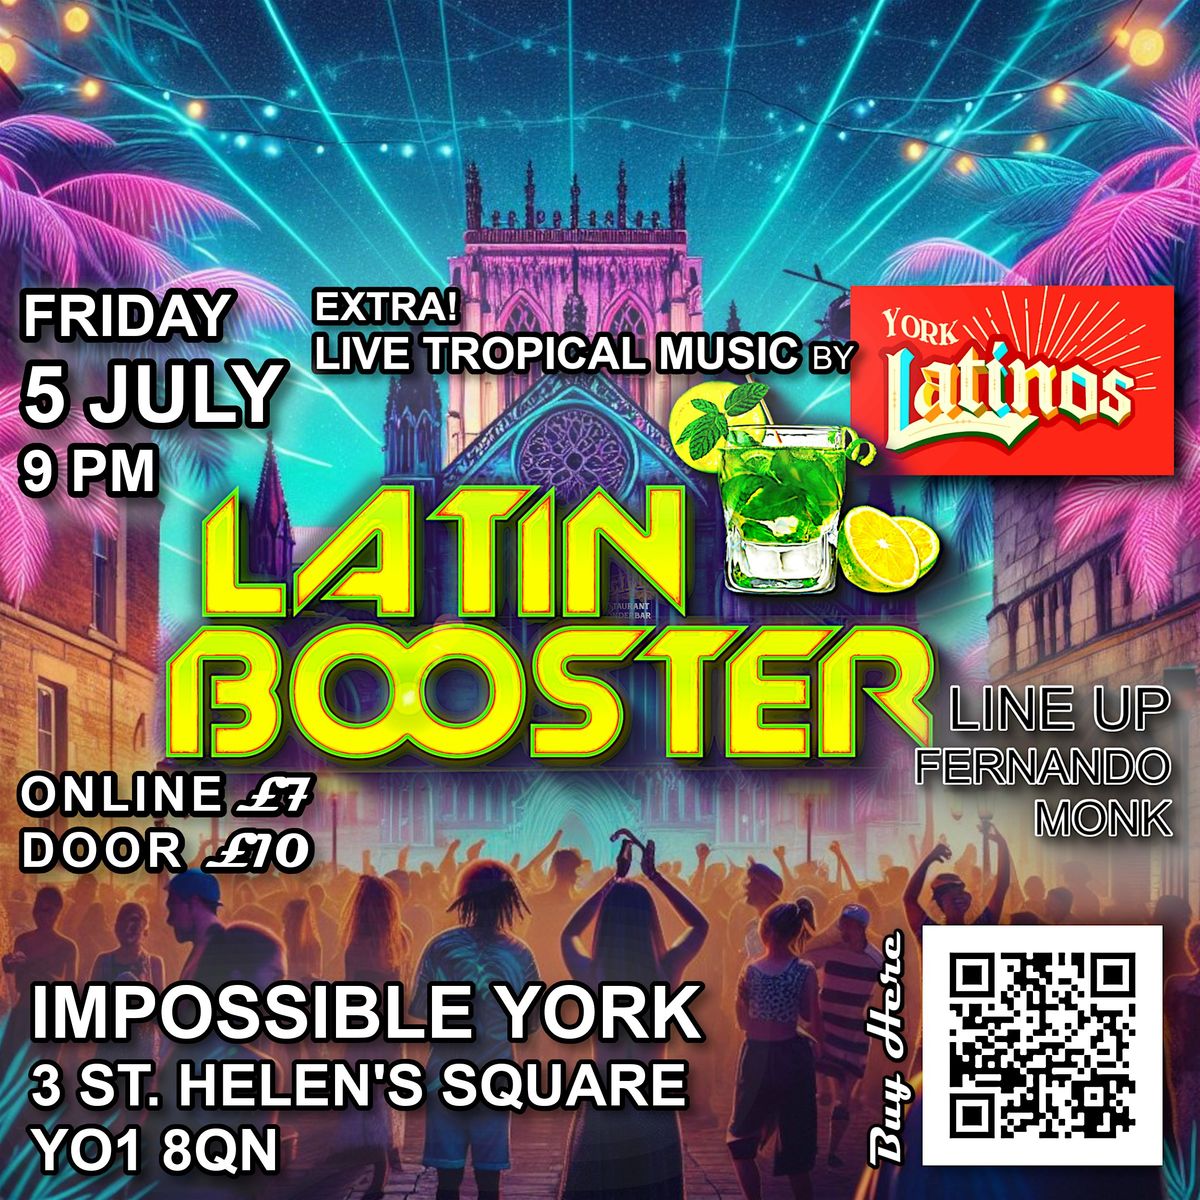 Latin Booster Party + Live Music by York Latinos Band! Impossible York